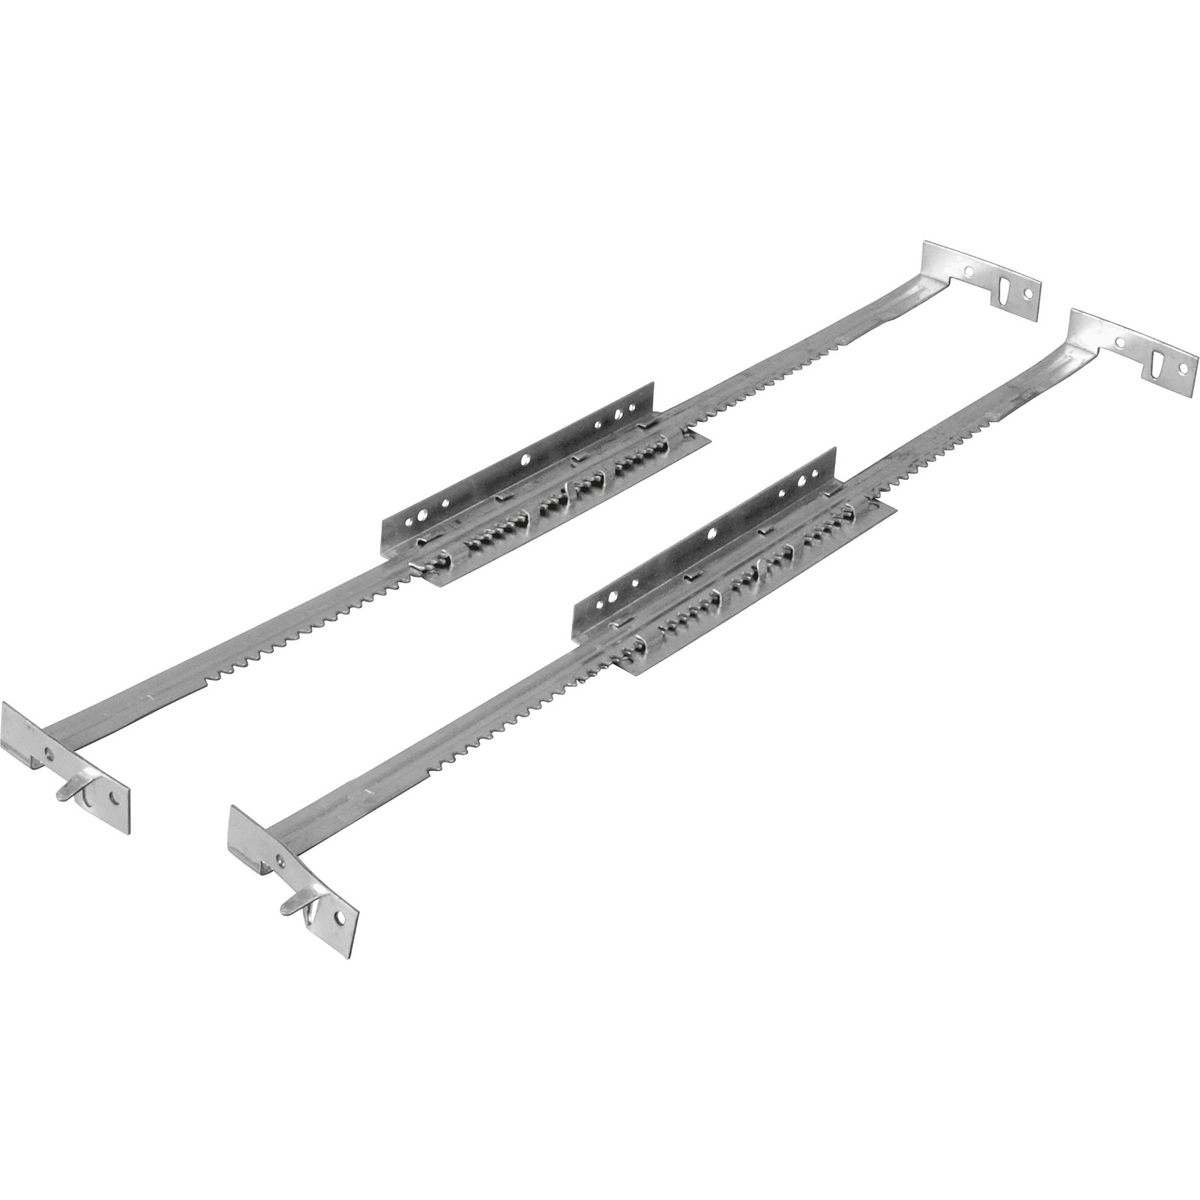 Recessed accessory - Two hanger bars adjustable up to 26 in. For use with Complete Squares and Complete Rounds.